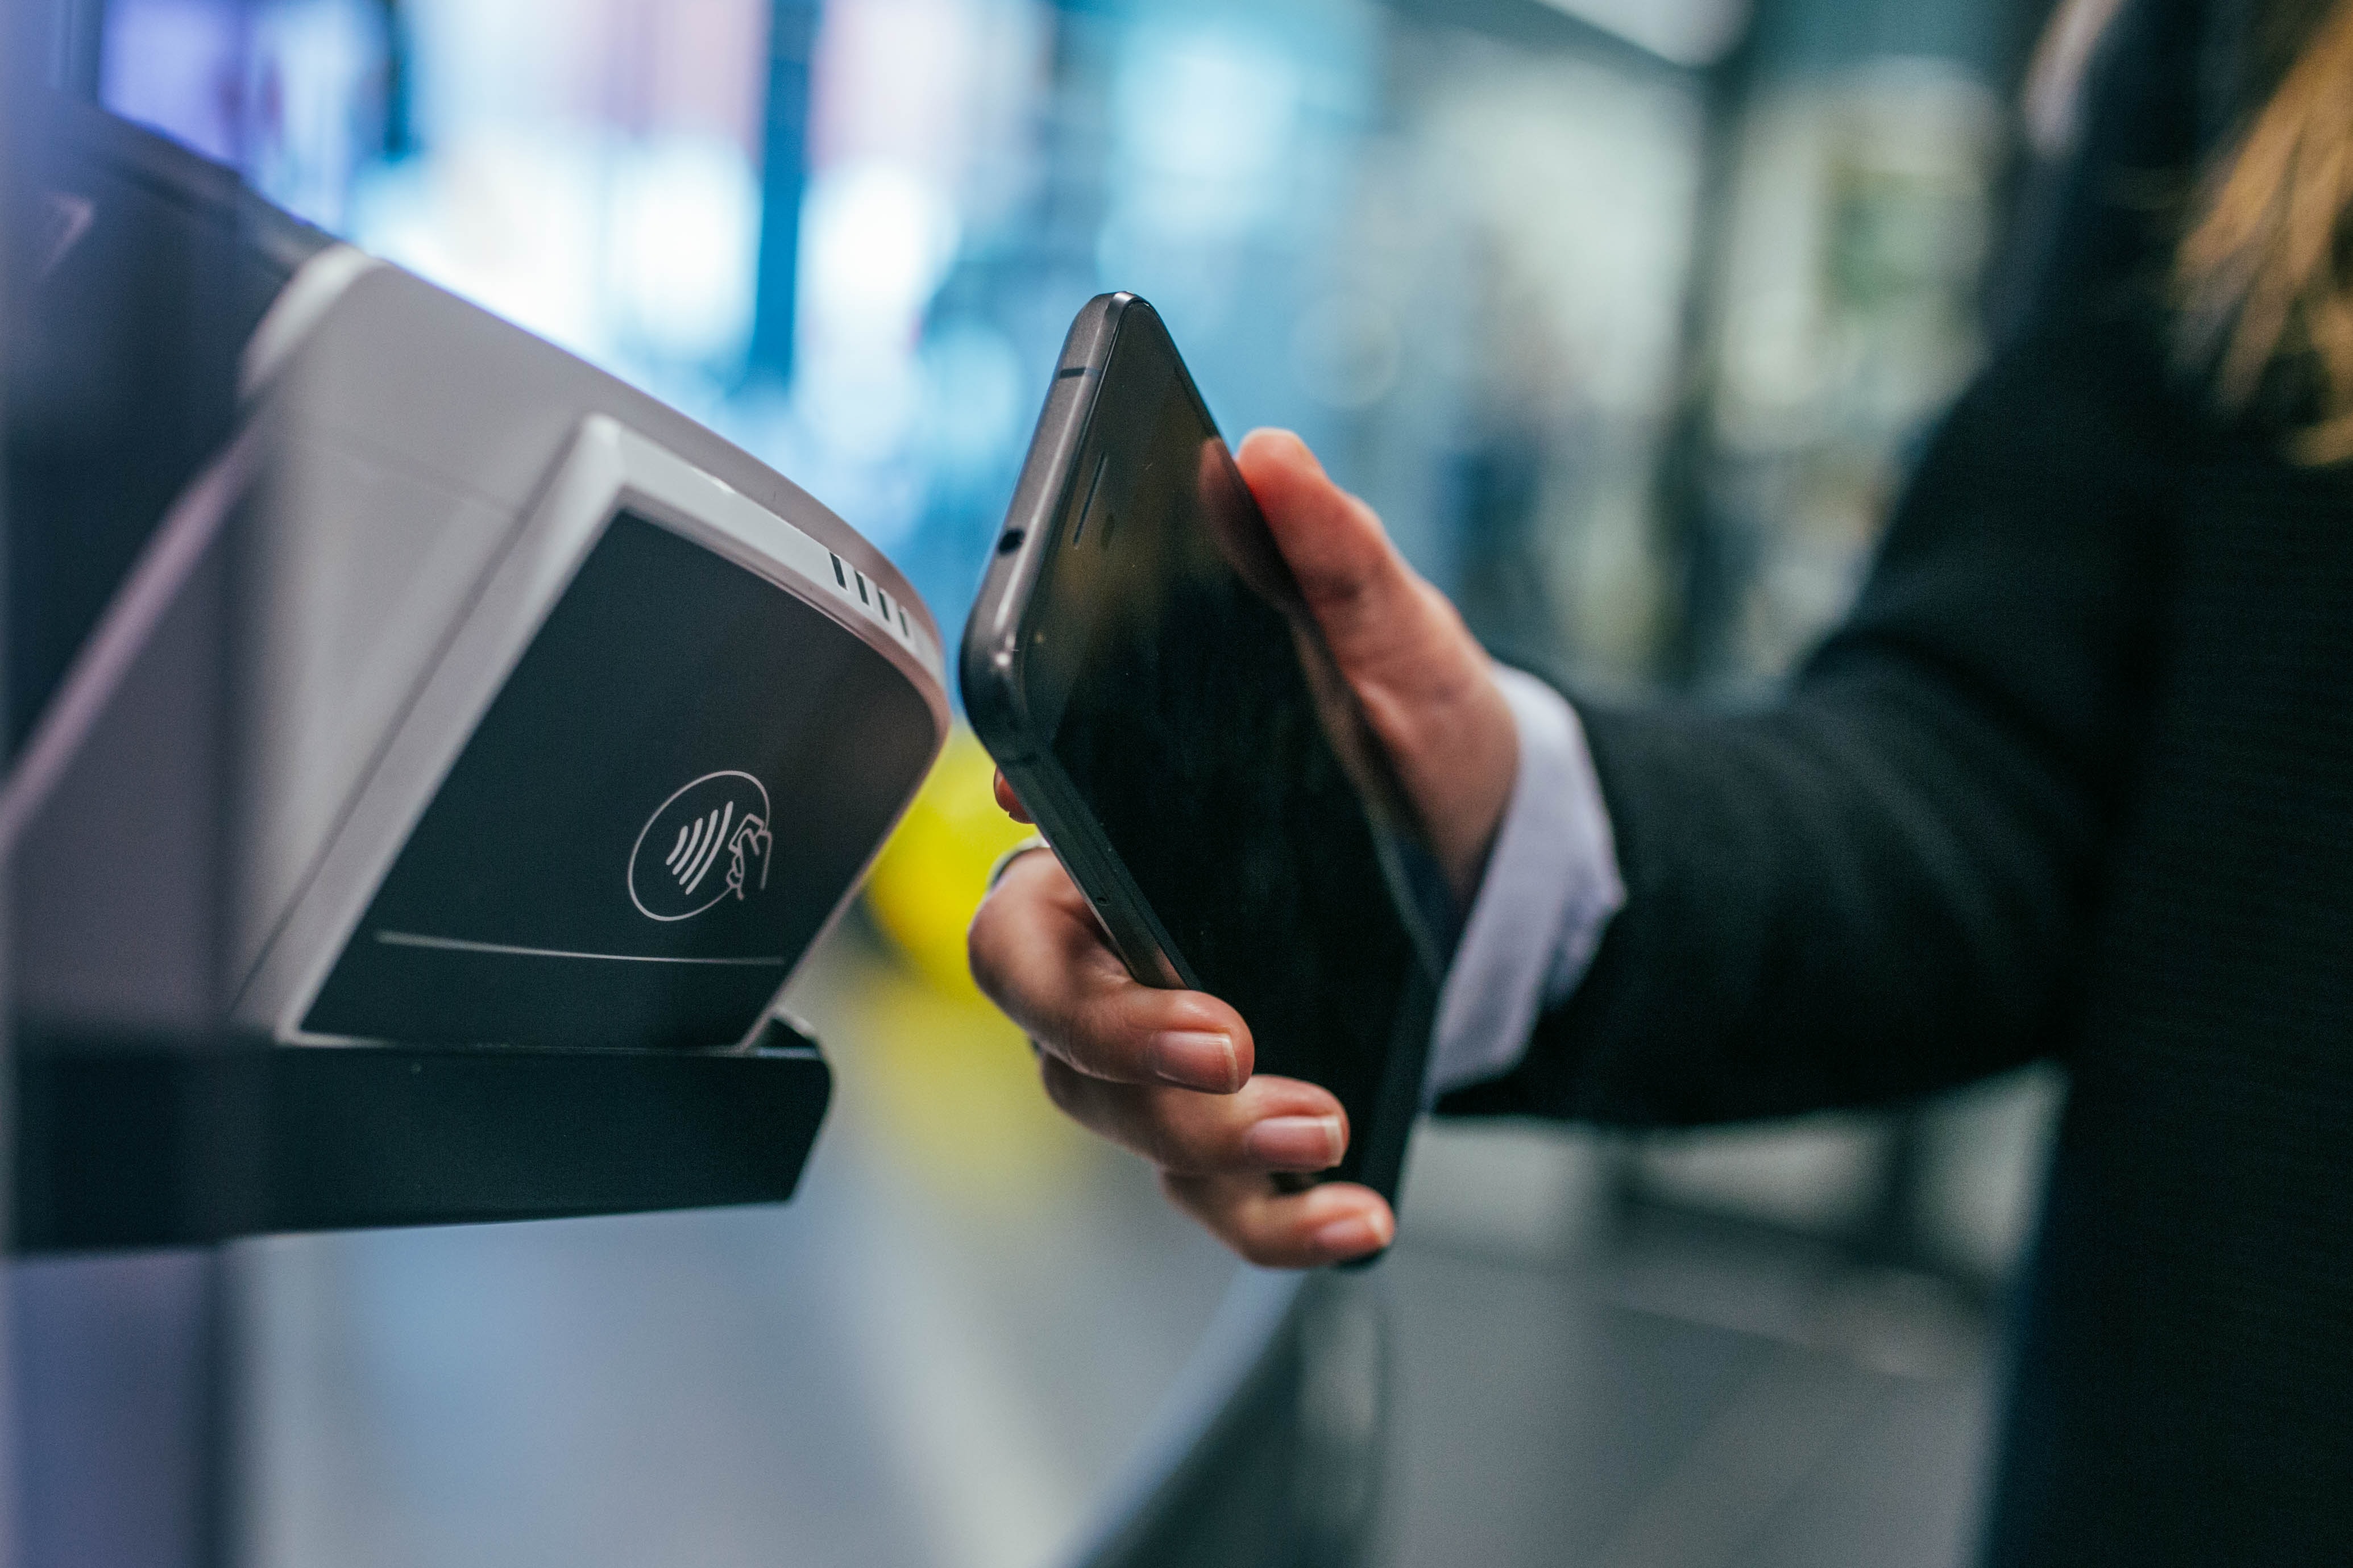 Latest Research Reveals How Over Half of UAE's Population Shifts to Using Digital Wallets